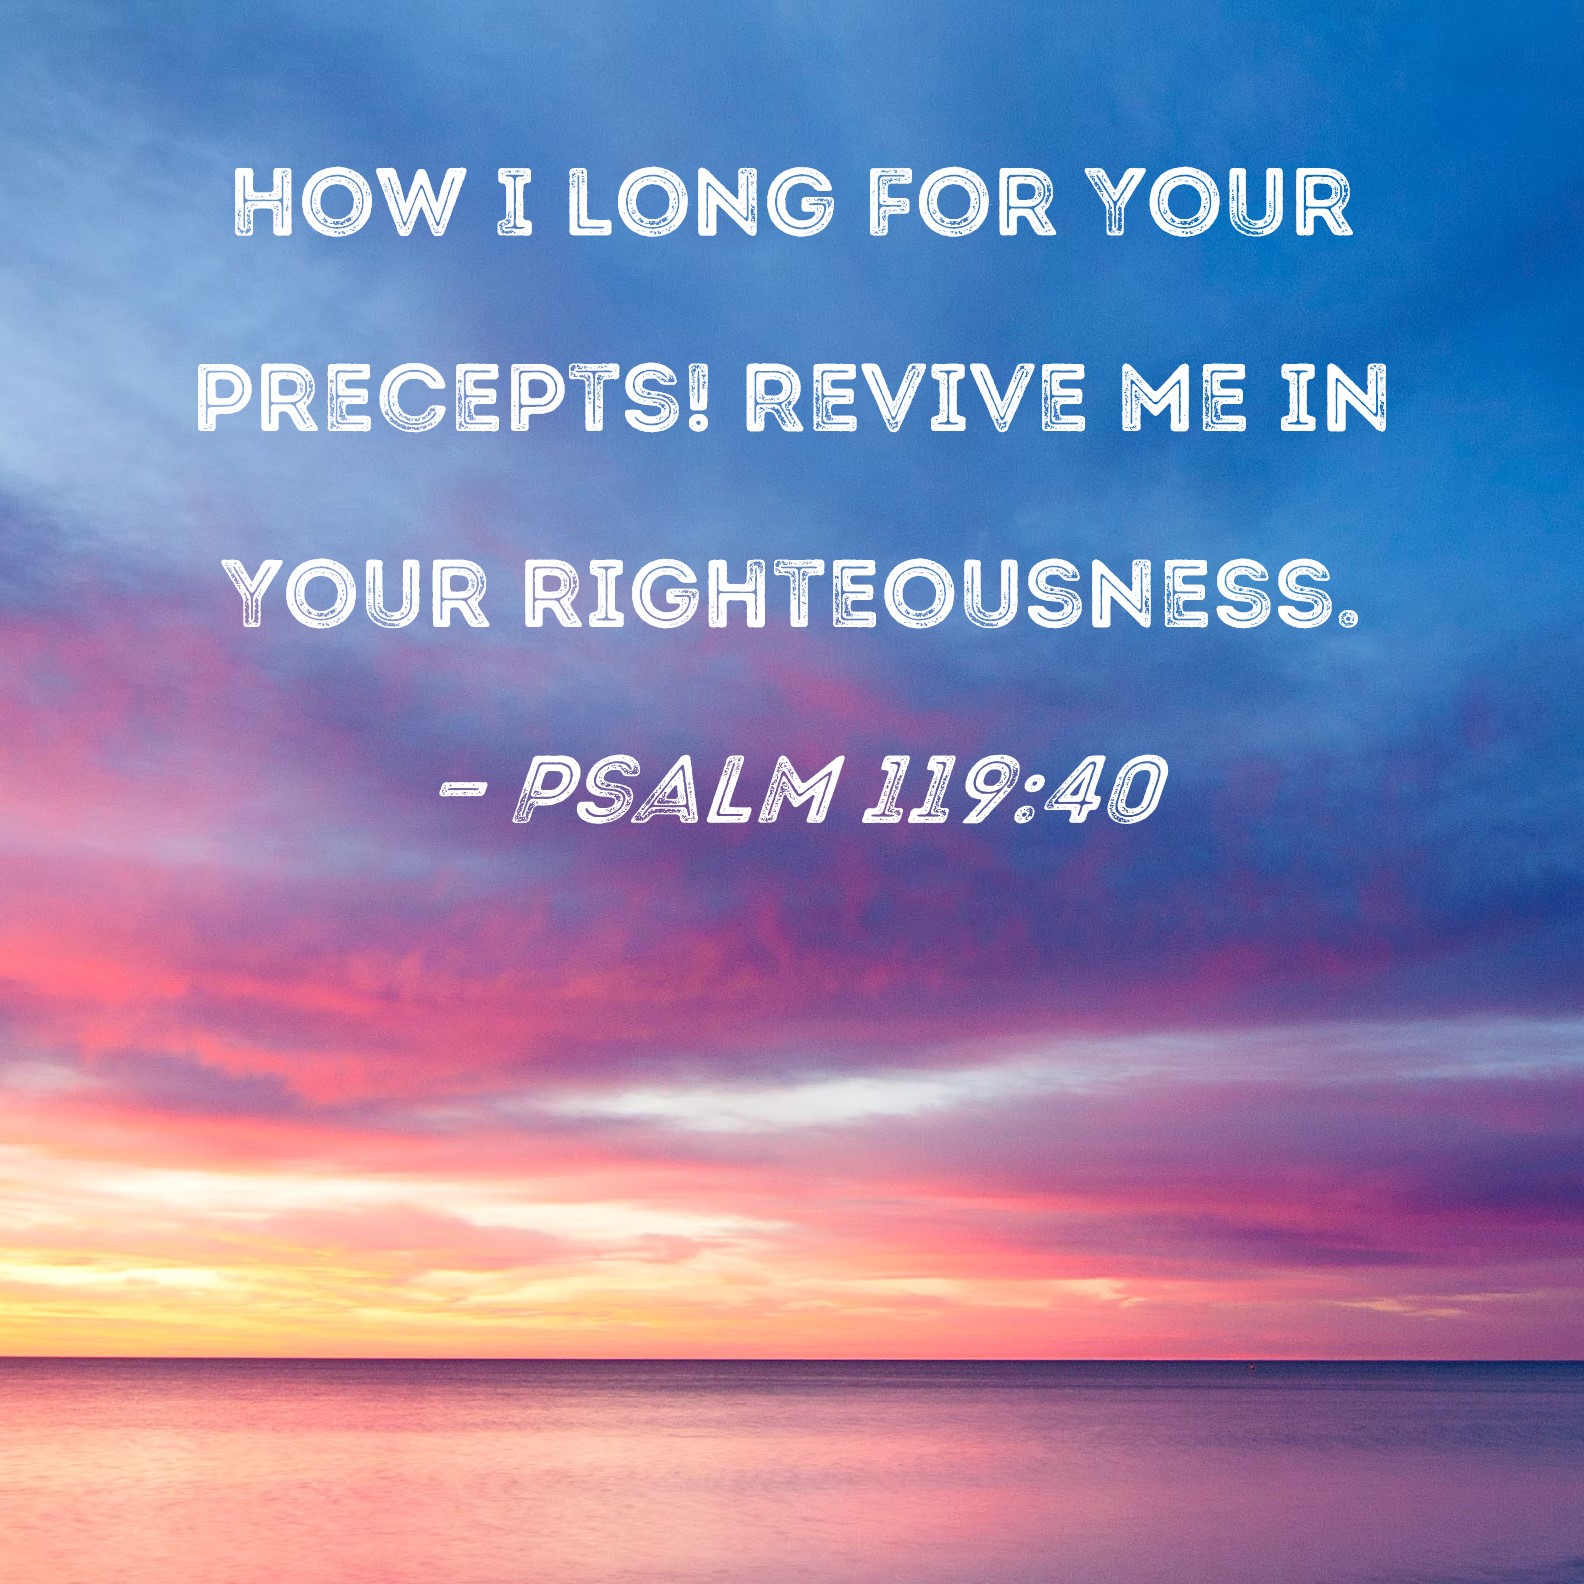 Psalm 119:40 How I long for Your precepts! Revive me in Your righteousness.